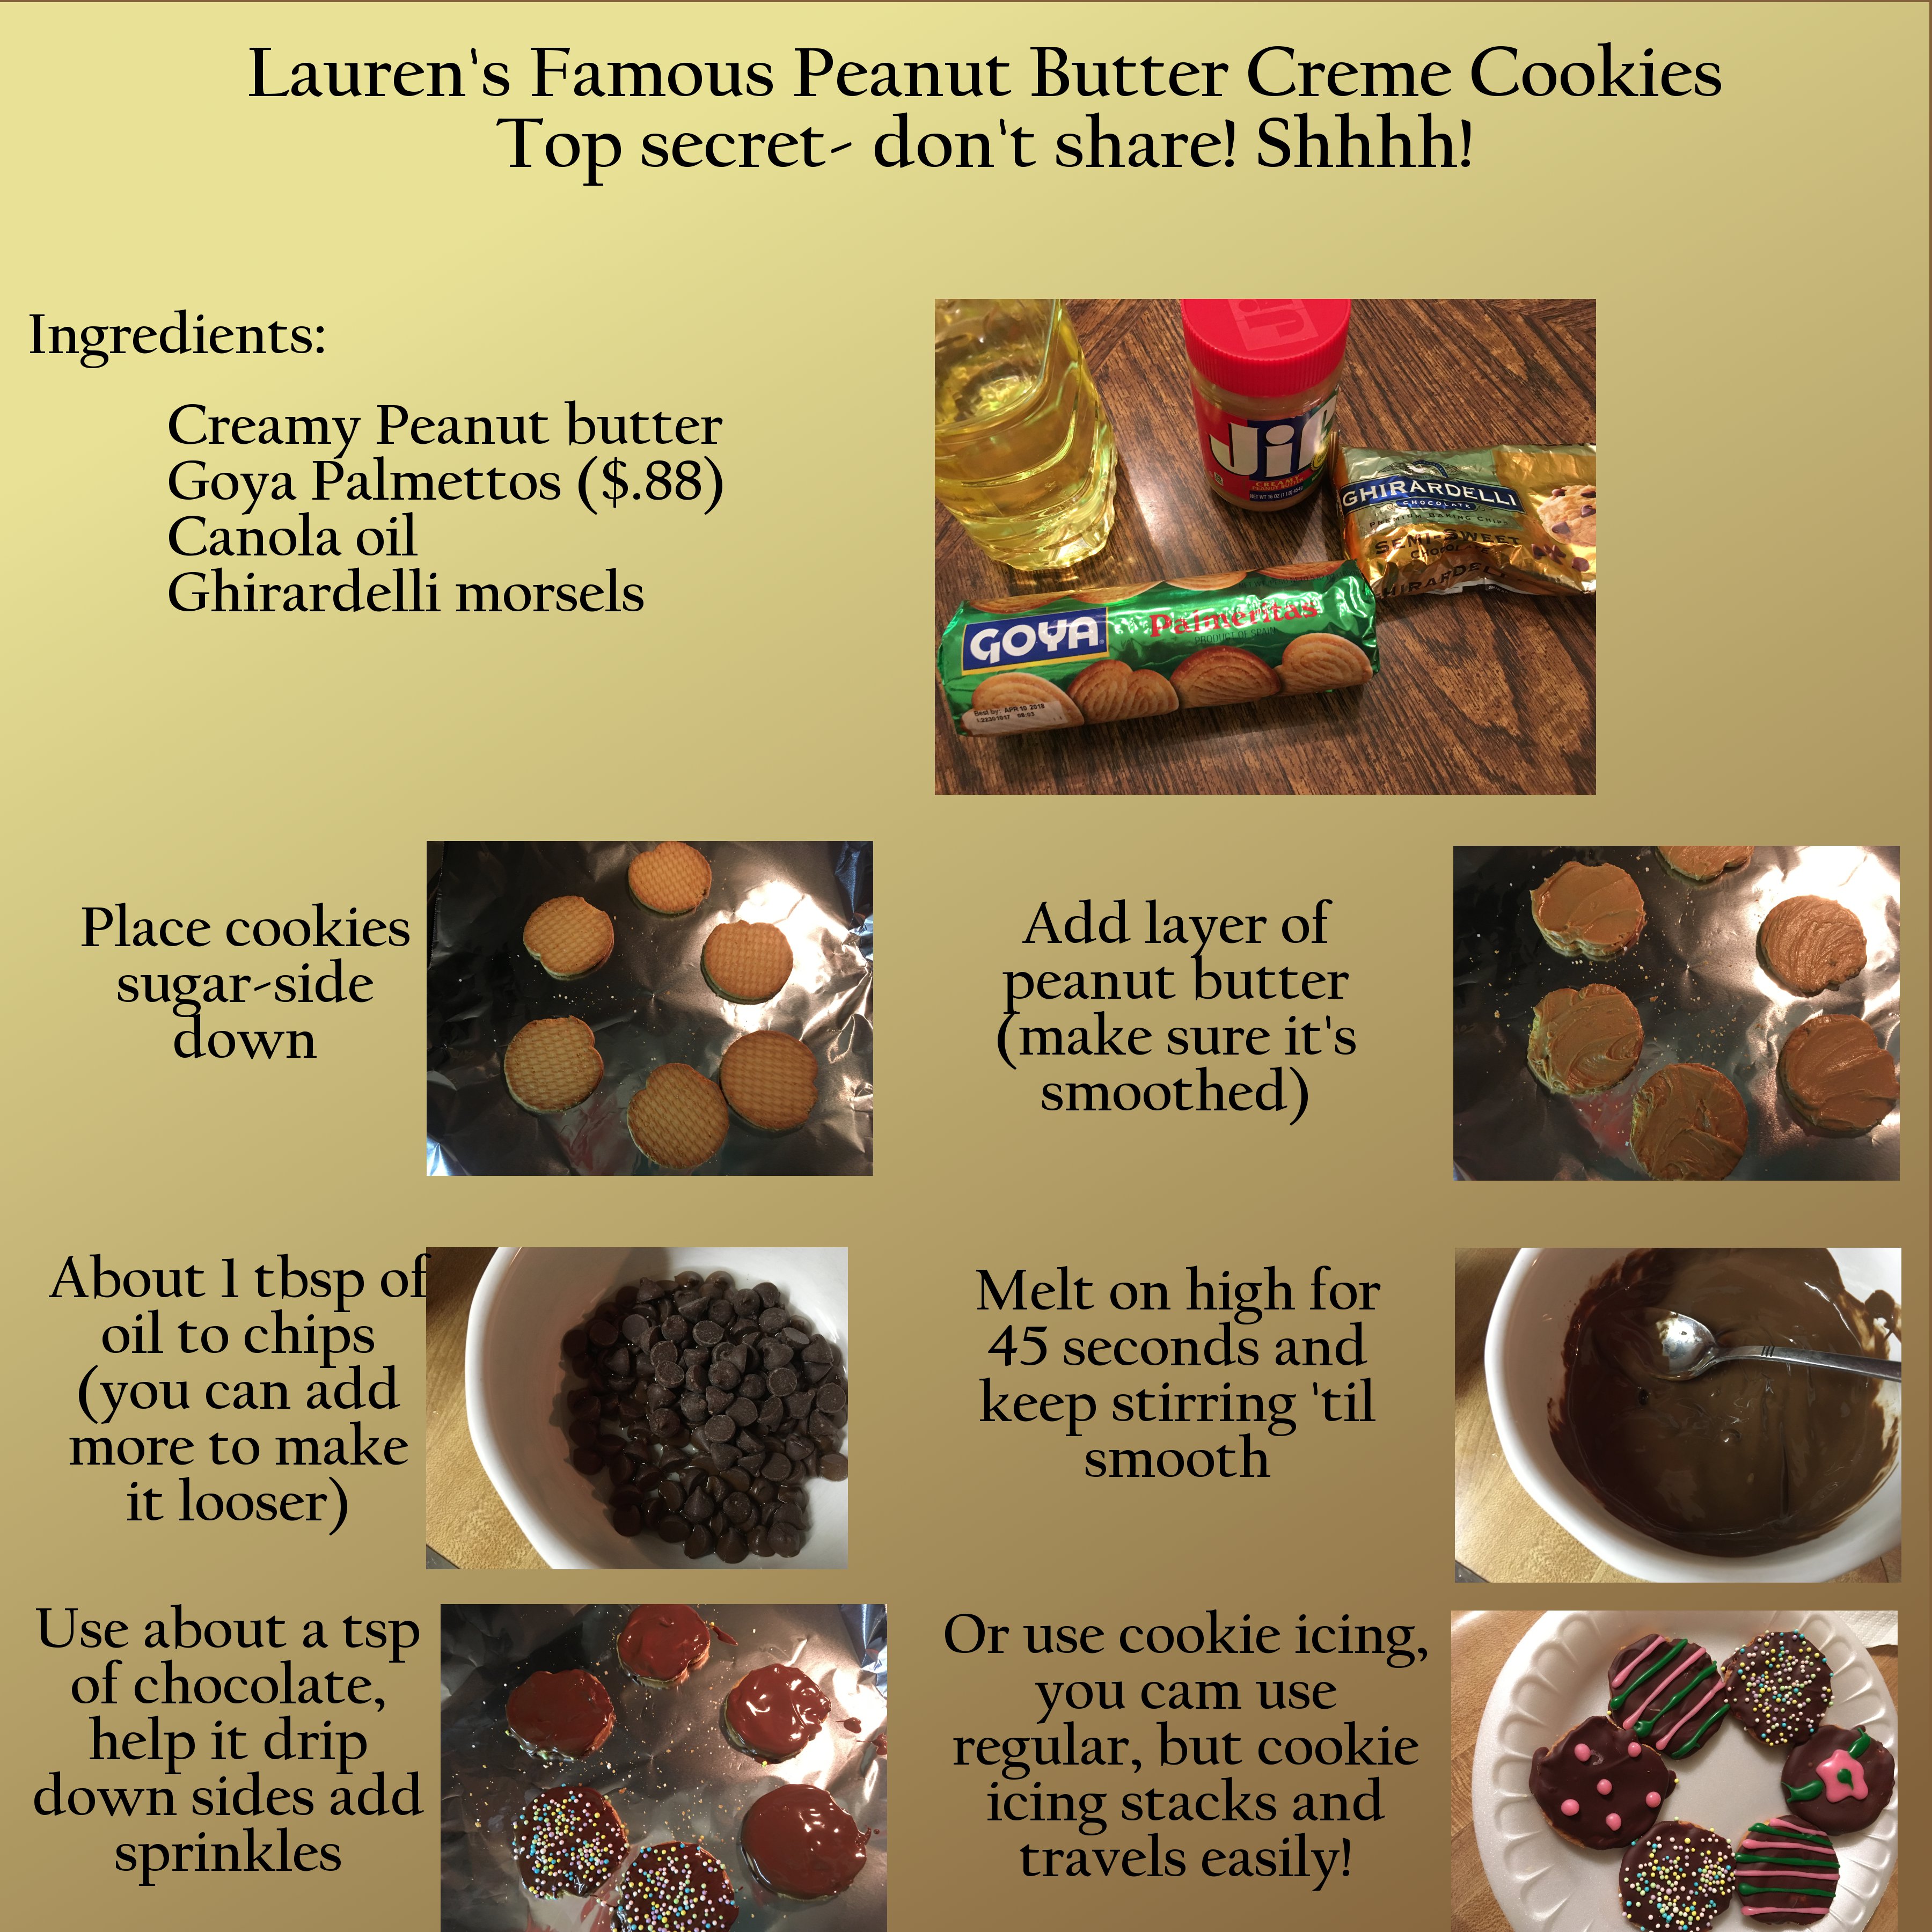 chocolate - Lauren's Famous Peanut Butter Creme Cookies Top secretdon't ! Shhhh! Ingredients Creamy Peanut butter Goya Palmettos $.88 Canola oil Ghirardelli morsels Govar Place cookies sugarside down Add layer of peanut butter make sure it's smoothed Abou